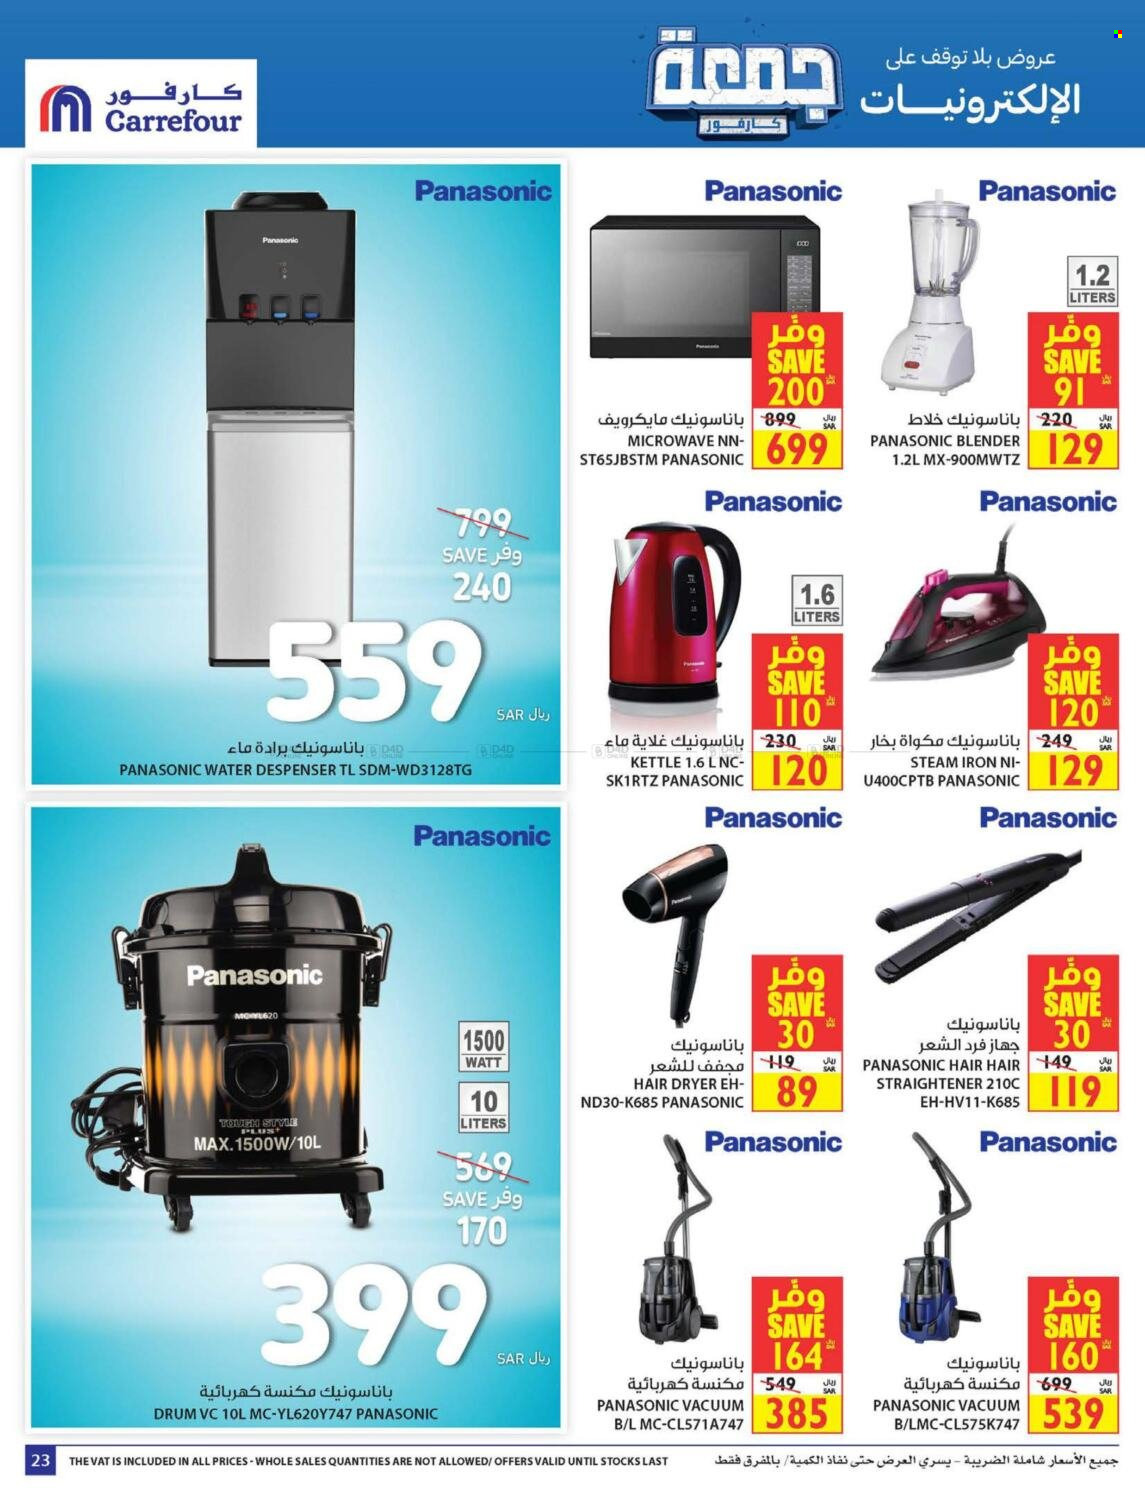 Carrefour flyer  - 10.28.2021 - 11.23.2021. Page 23.